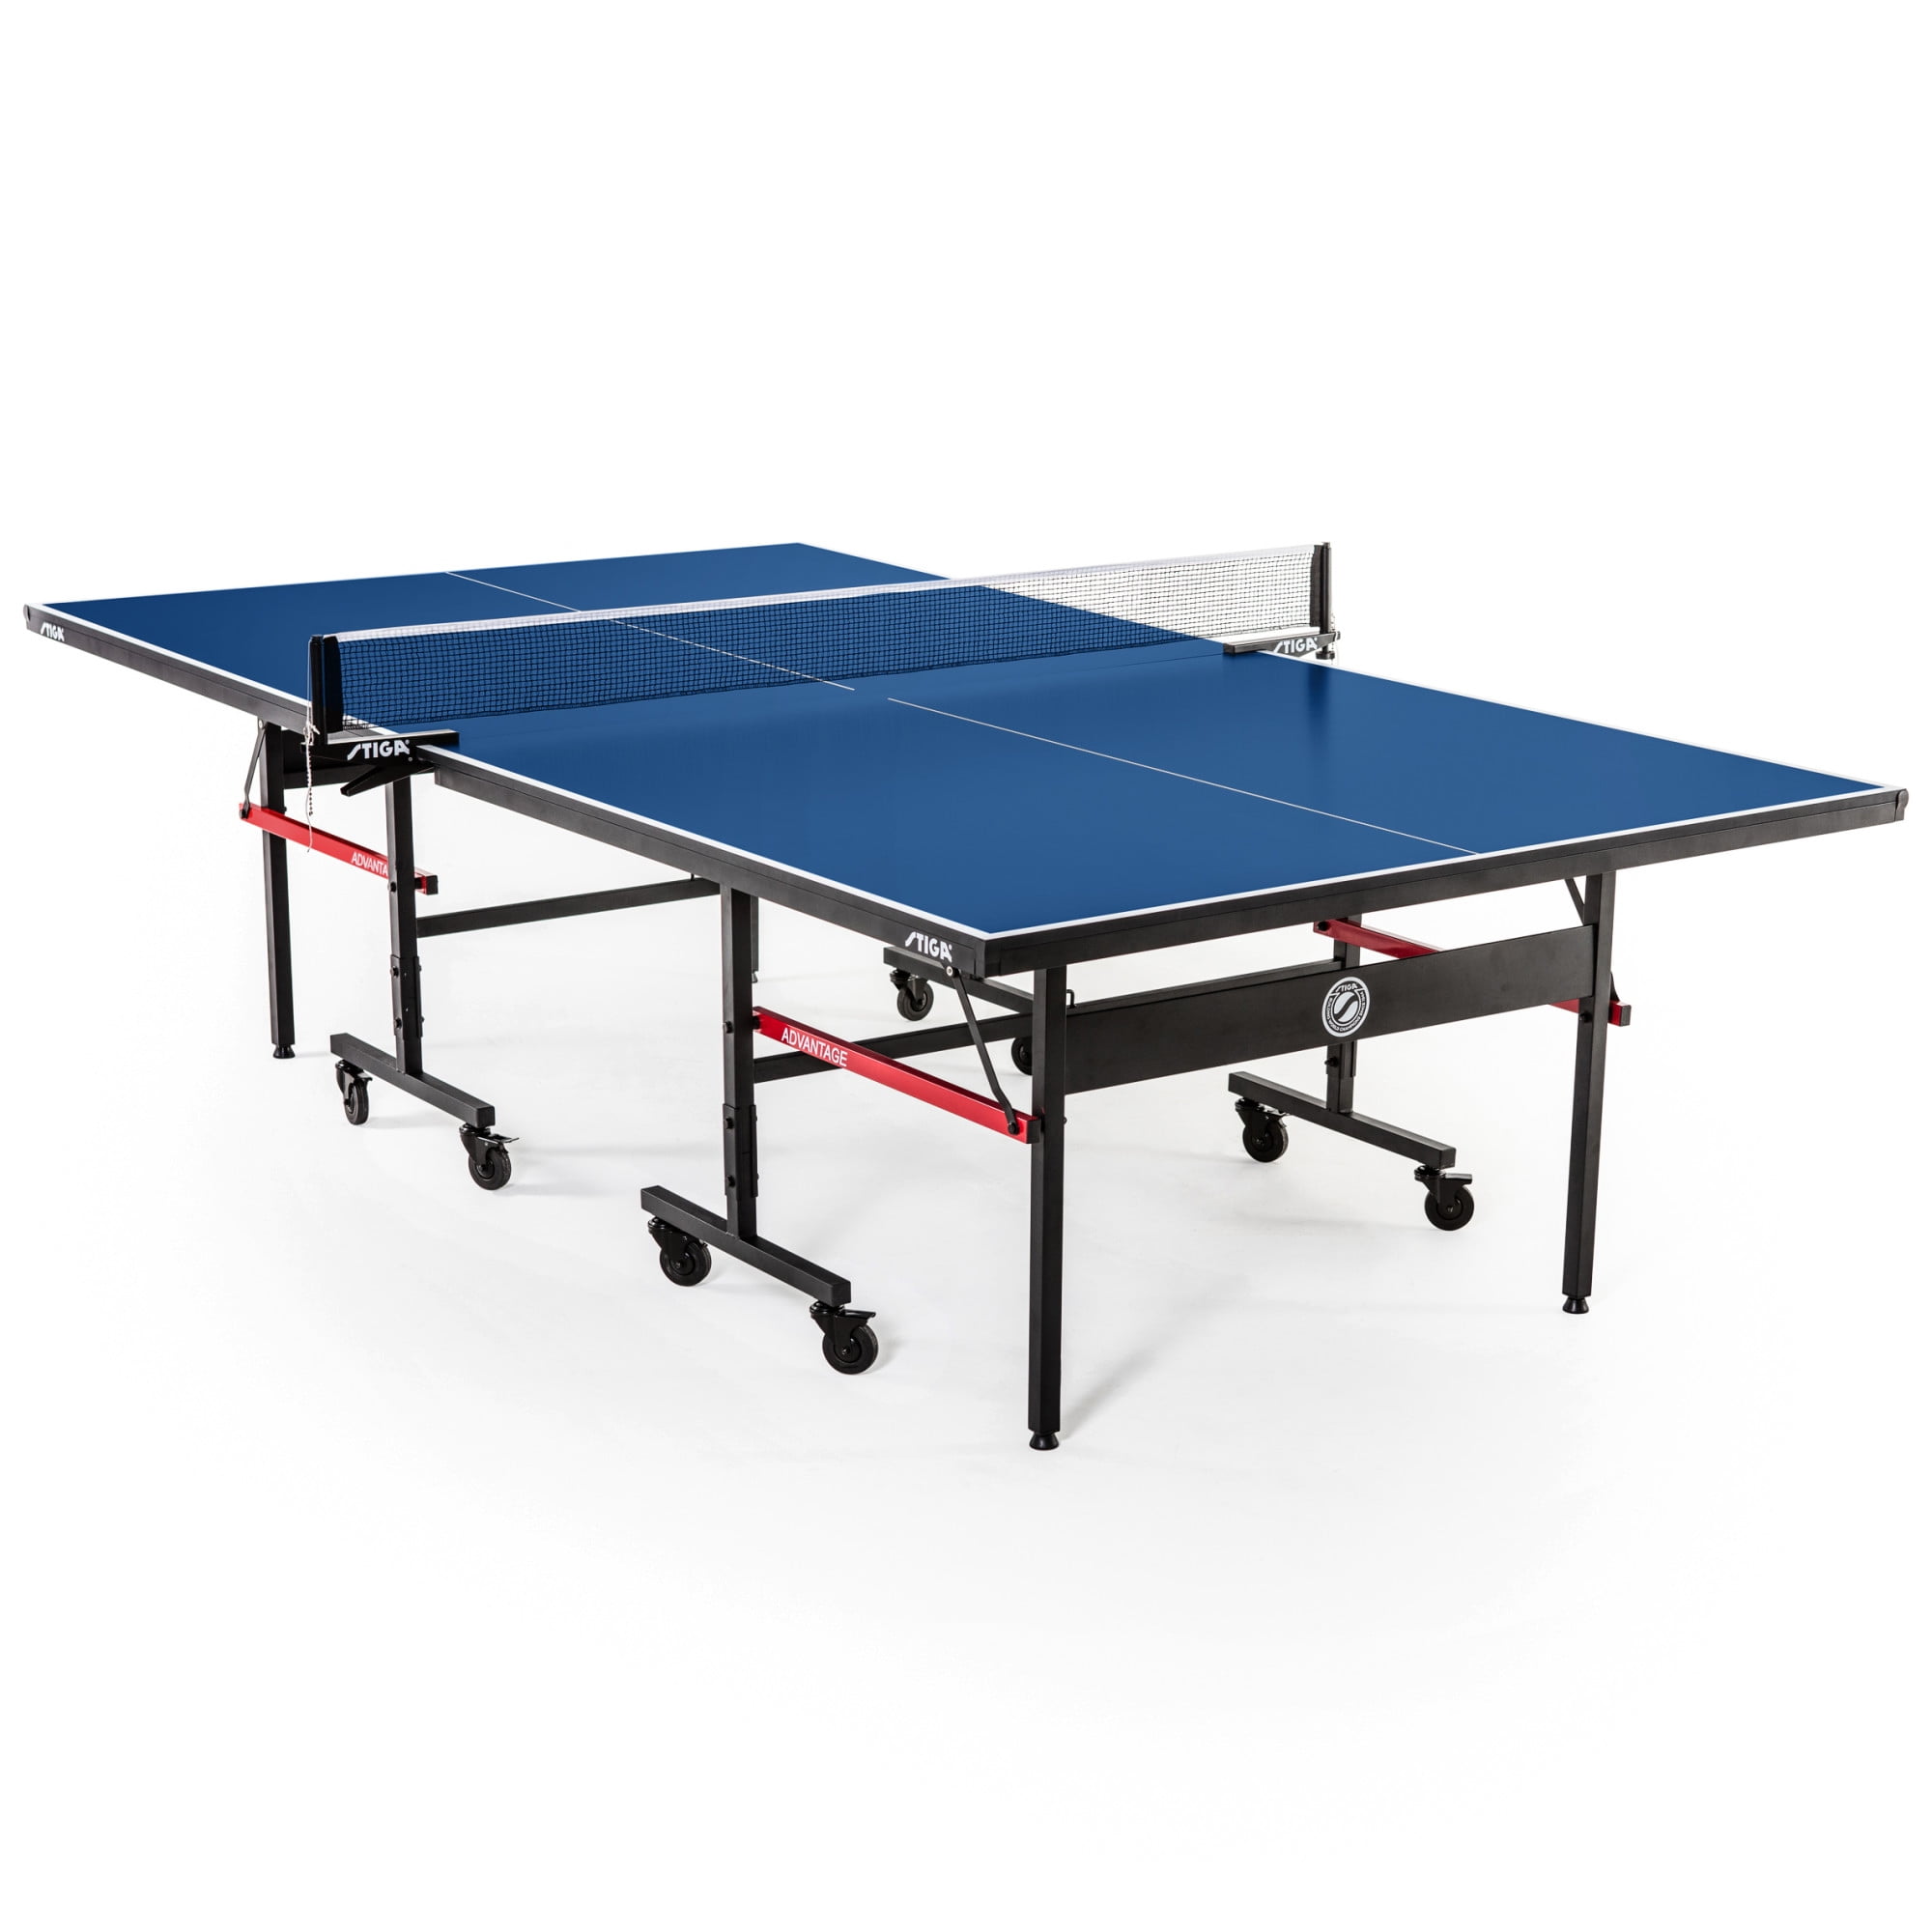 Registratie Ongewapend zeil STIGA Advantage Competition-Ready Indoor Table Tennis Table Excellent  Playability, Easy Storage 10-minute Assembly - Walmart.com